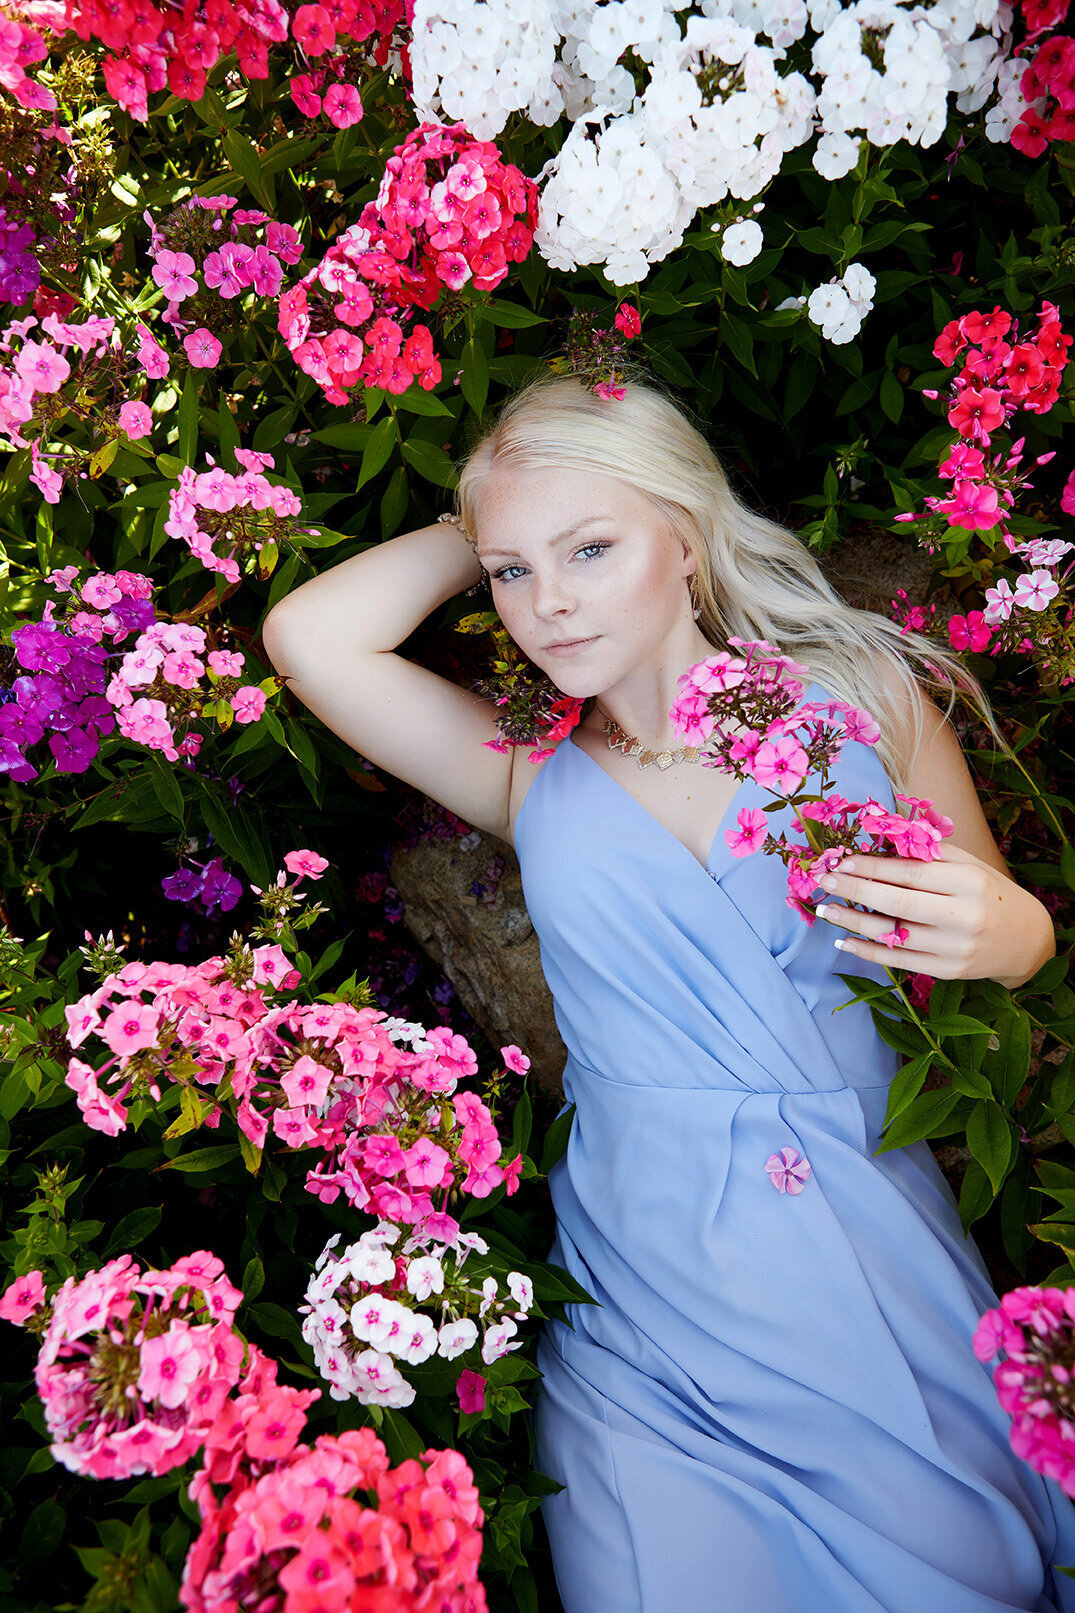 Blonde young woman laying on her back surrounded by phlox flowers looking up captured by Studio 64 Photography.